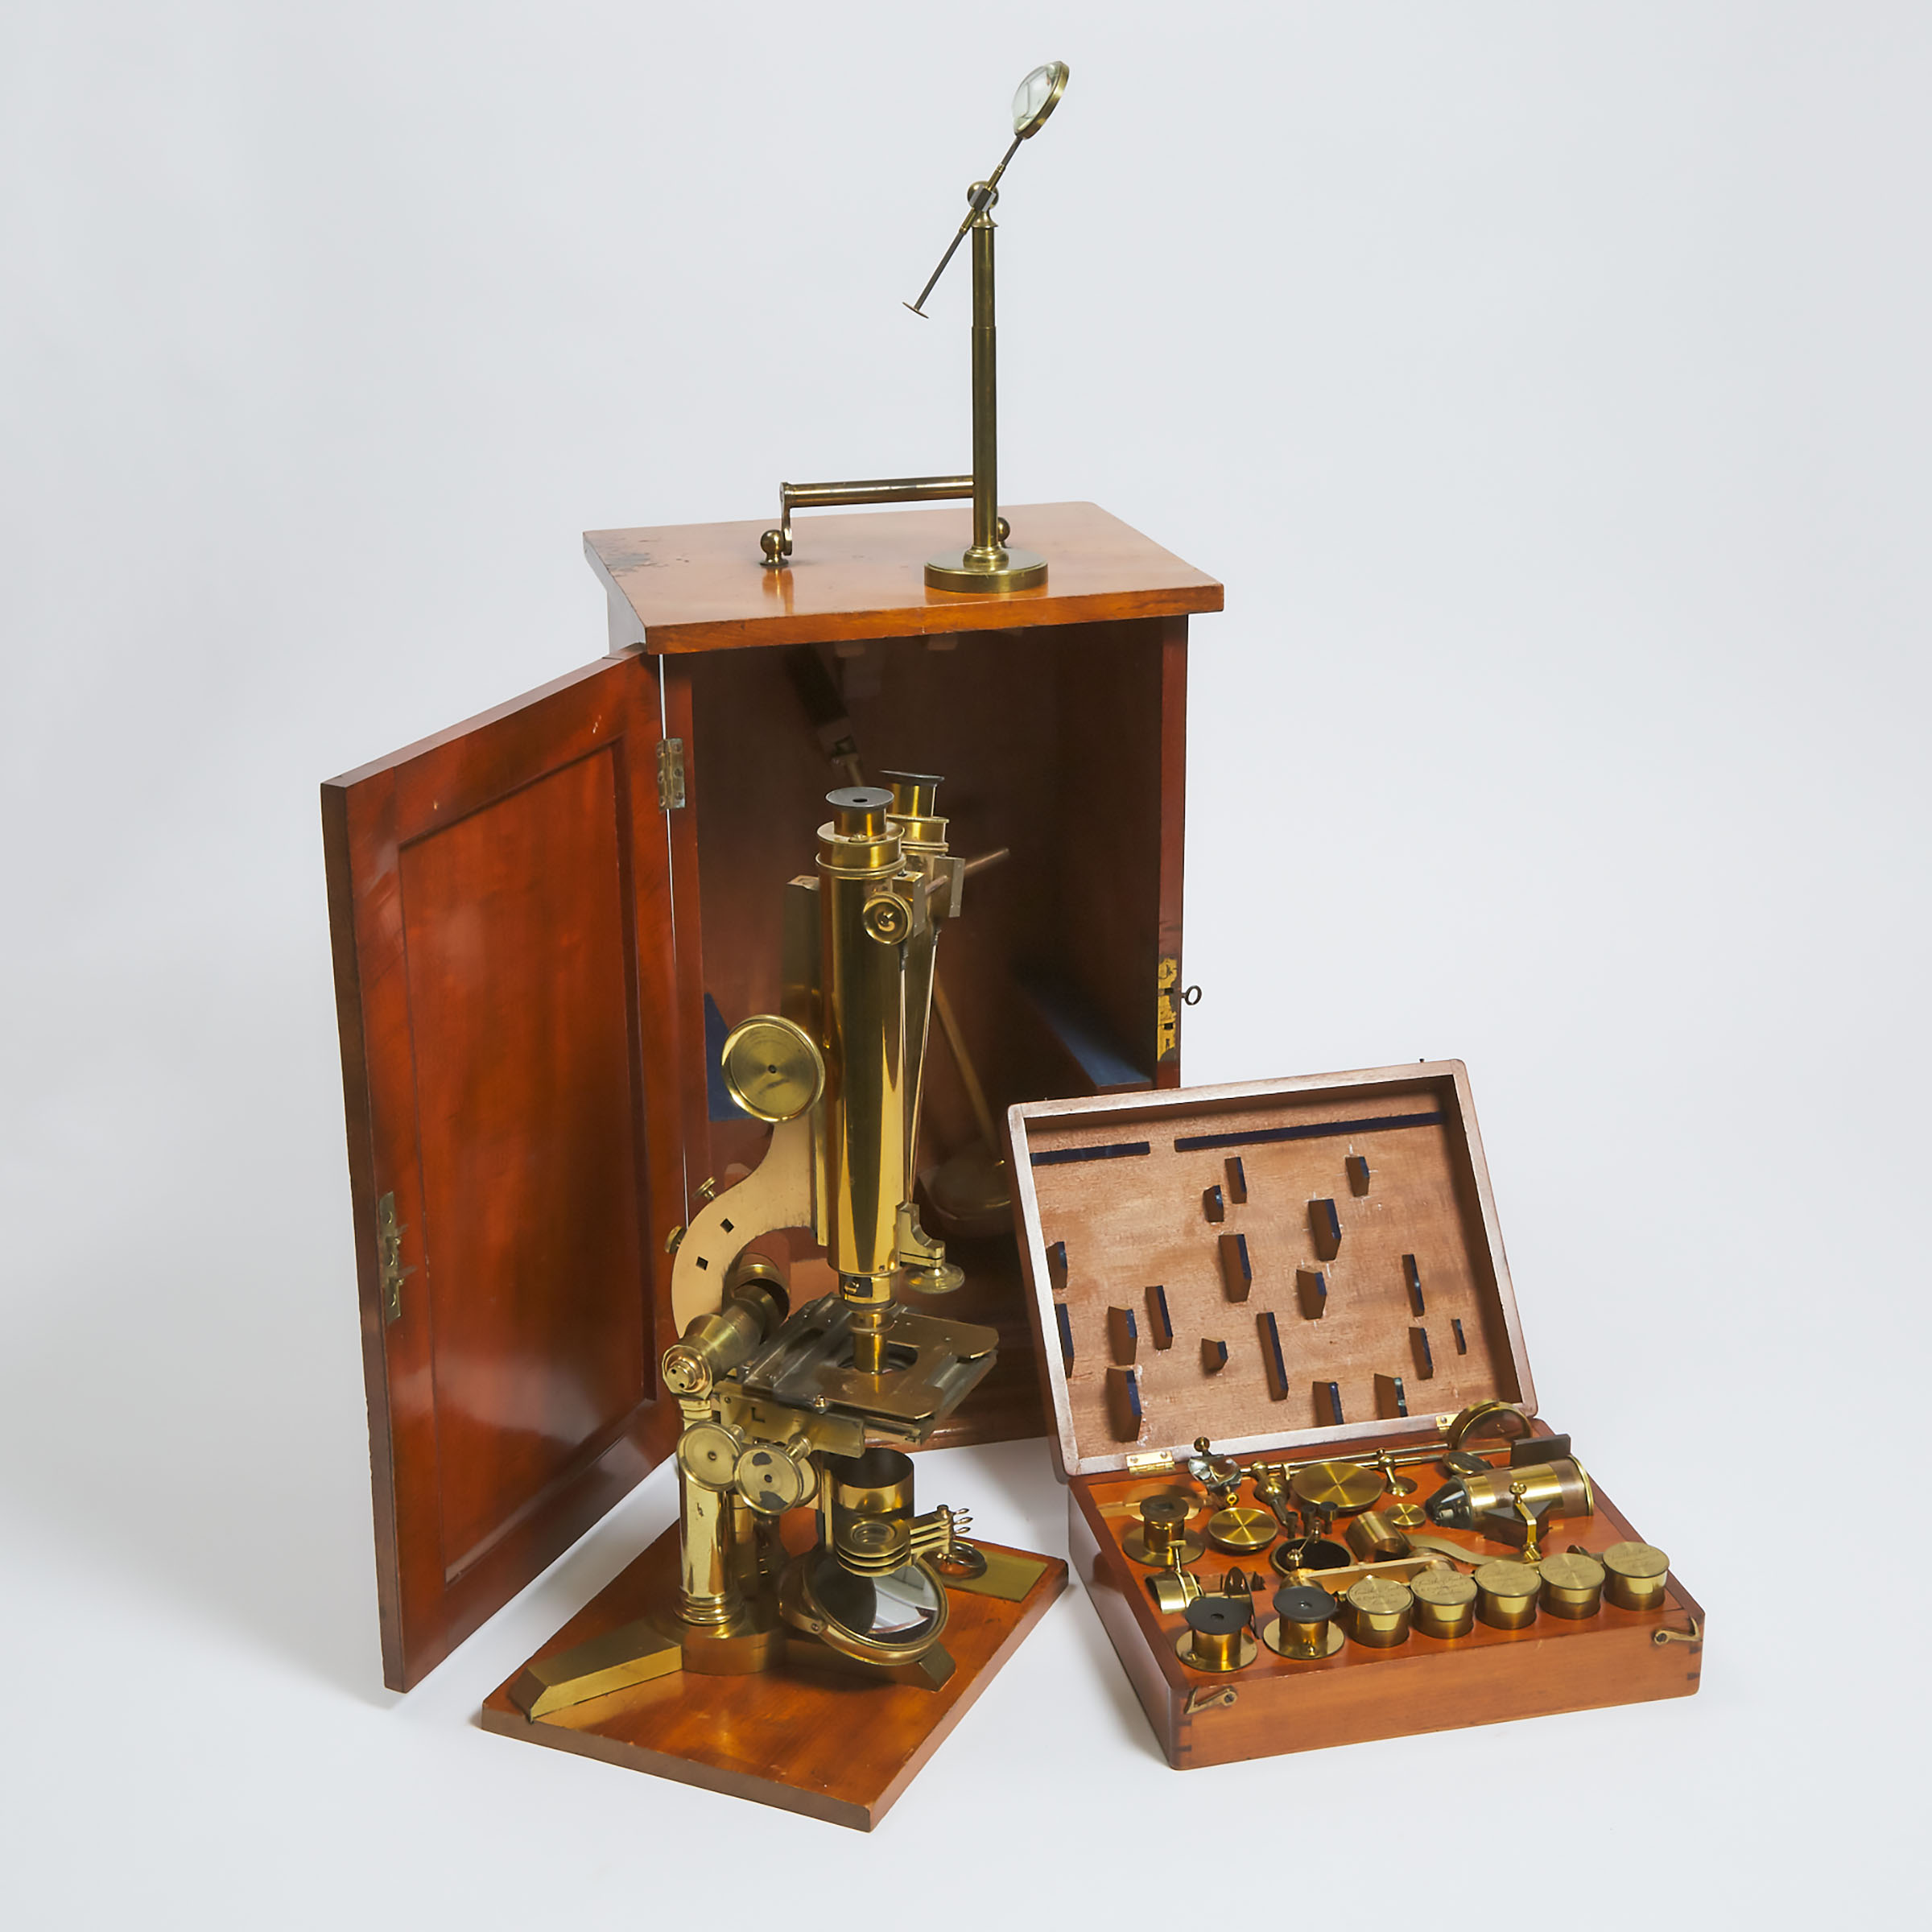 Smith & Beck, London, Lacquered Brass 'Best No. 1' Compound Binocular Microscope Outfit, c.1870